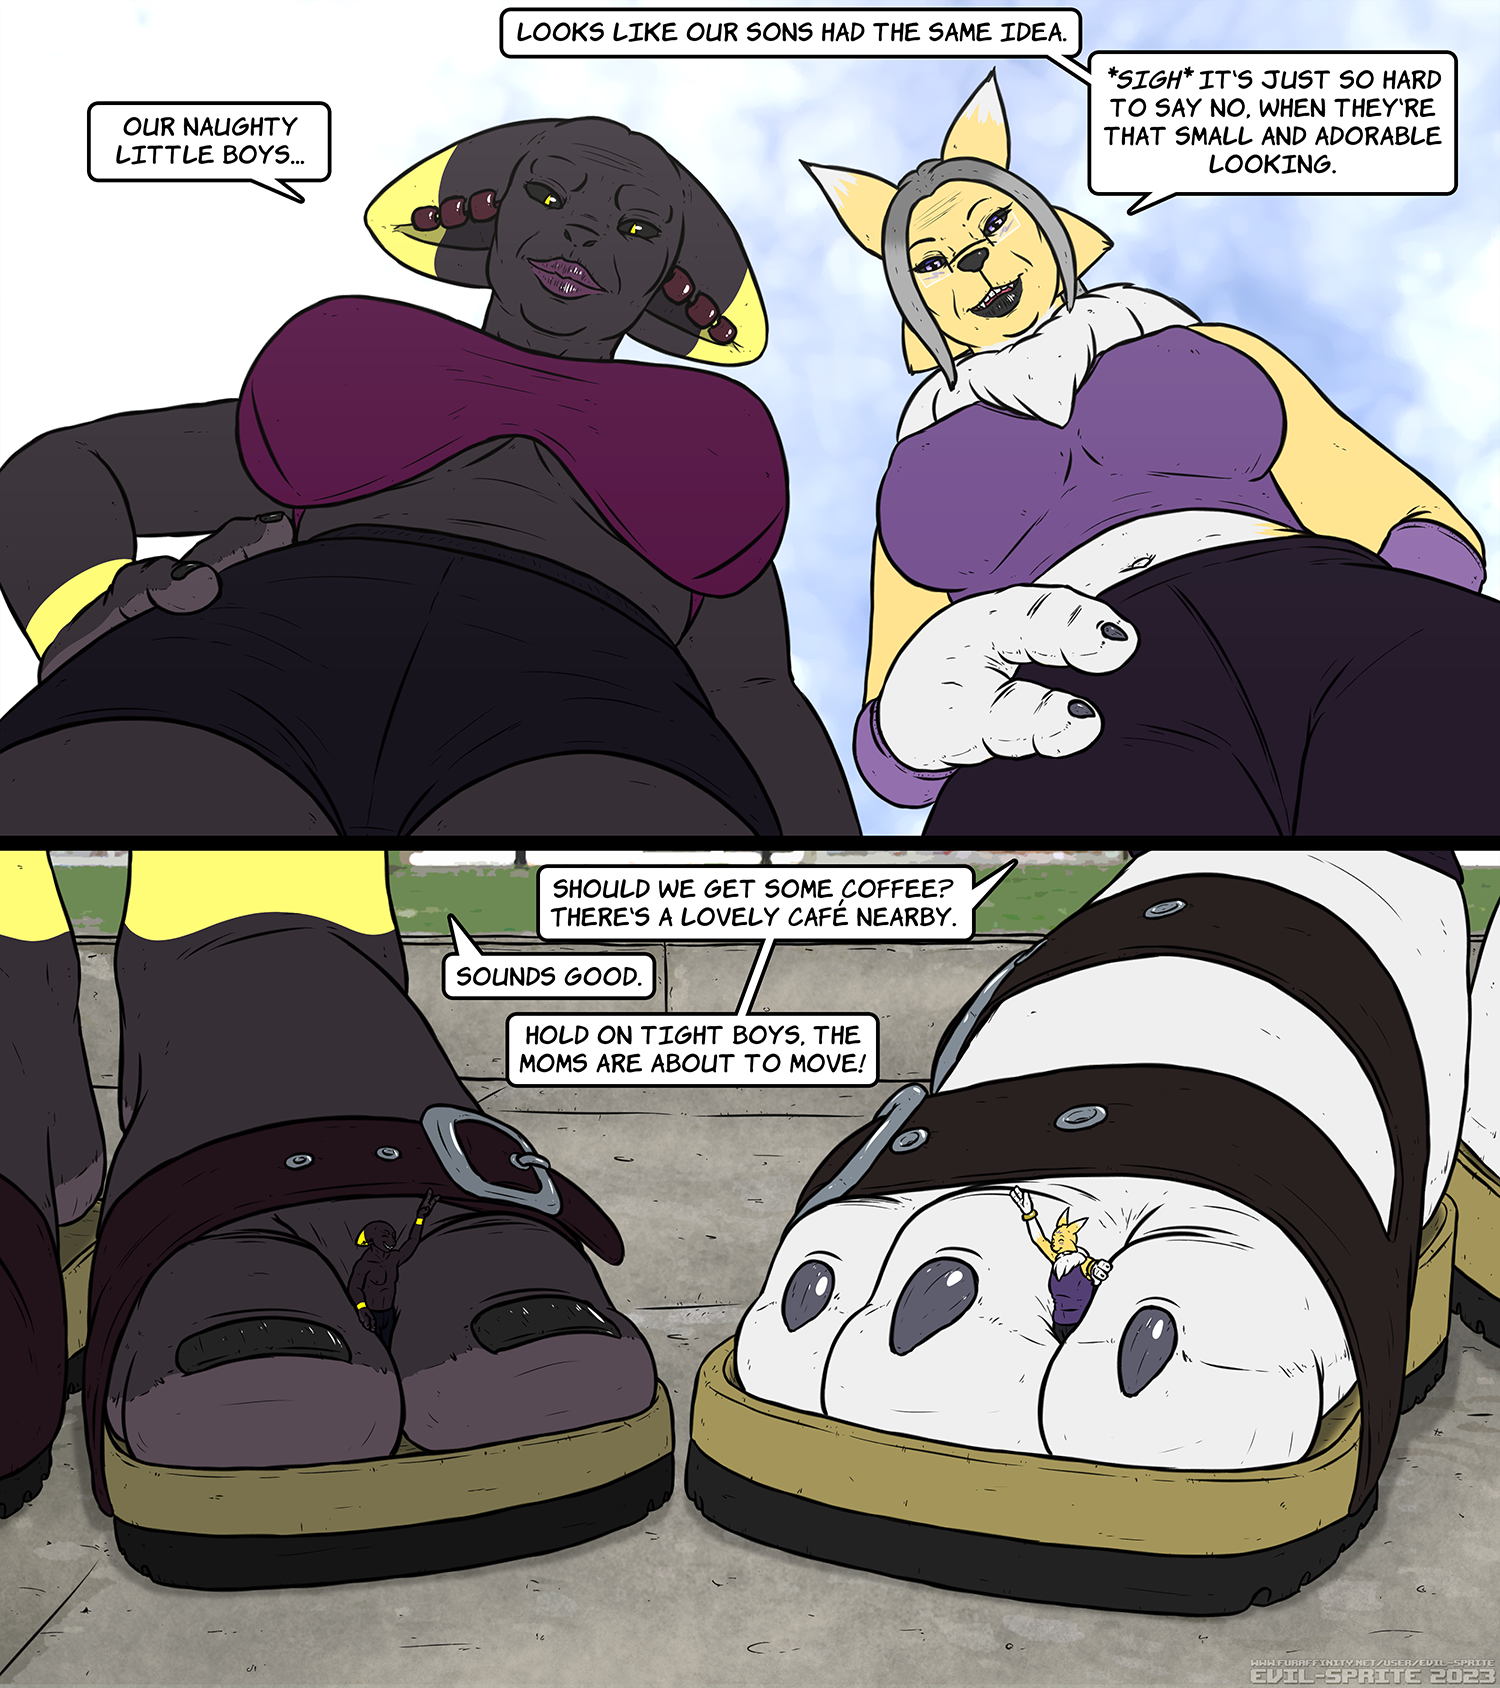 The Giantess in All Her Glory: Sensual Macro Comics Just for You